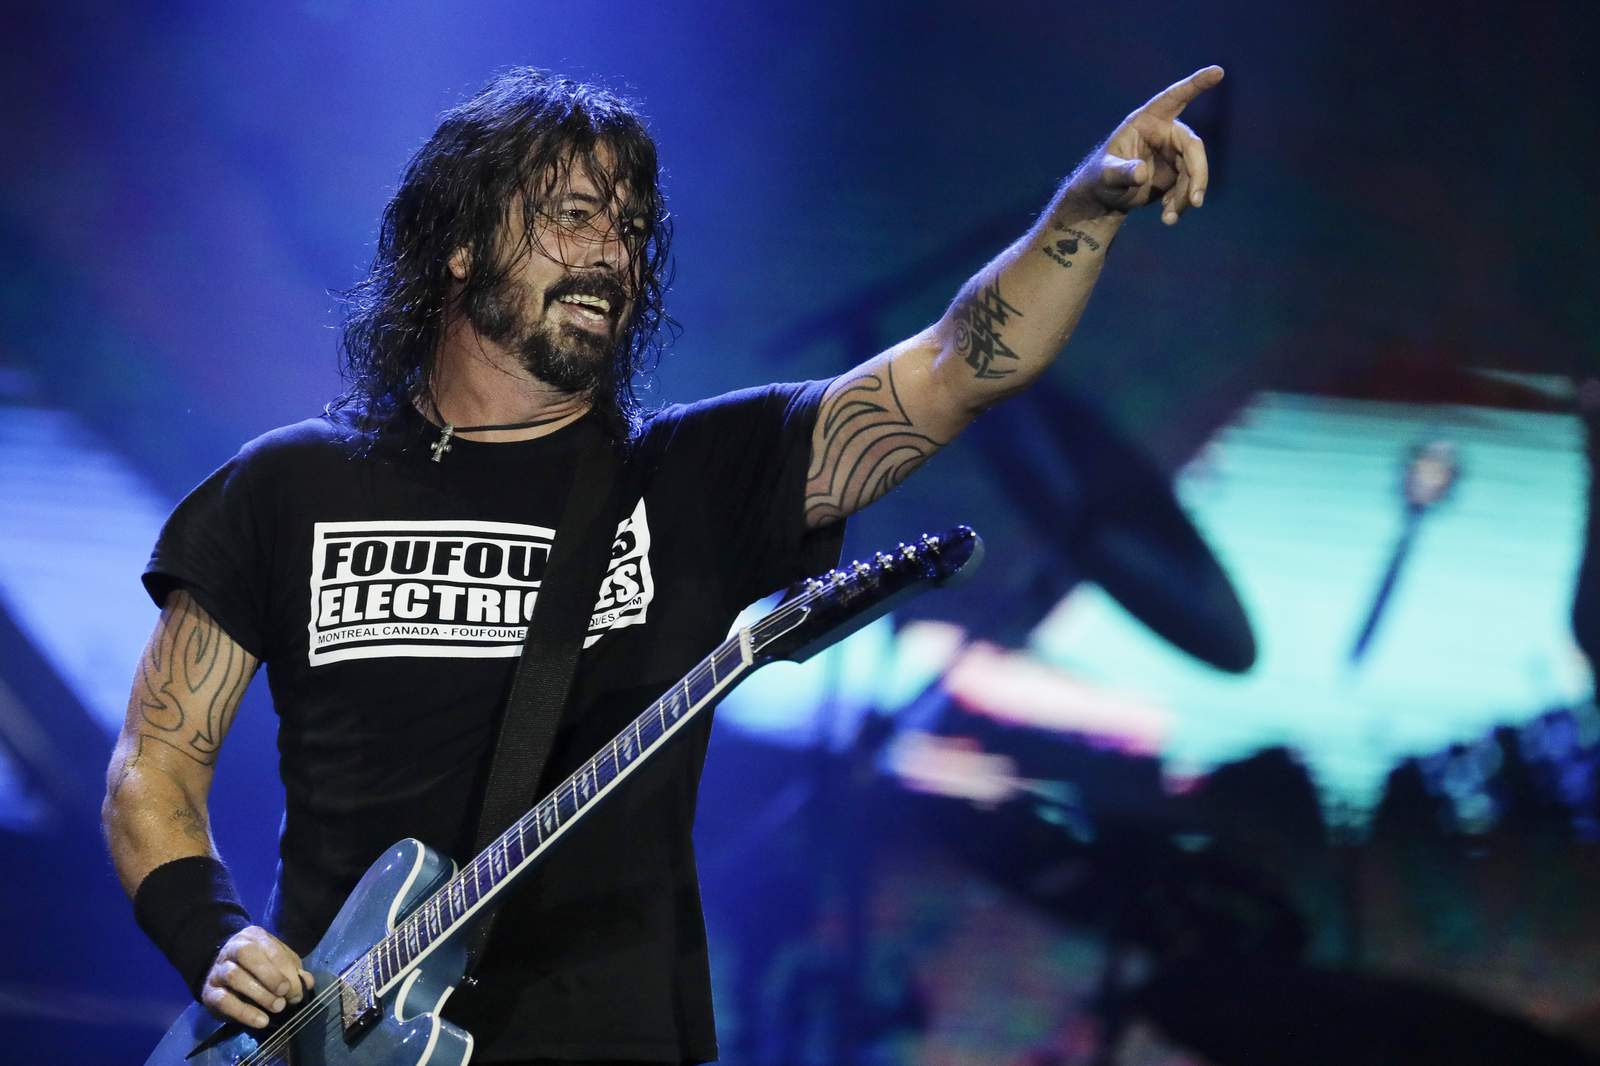 Dave Grohl memoir 'The Storyteller' coming out October 5